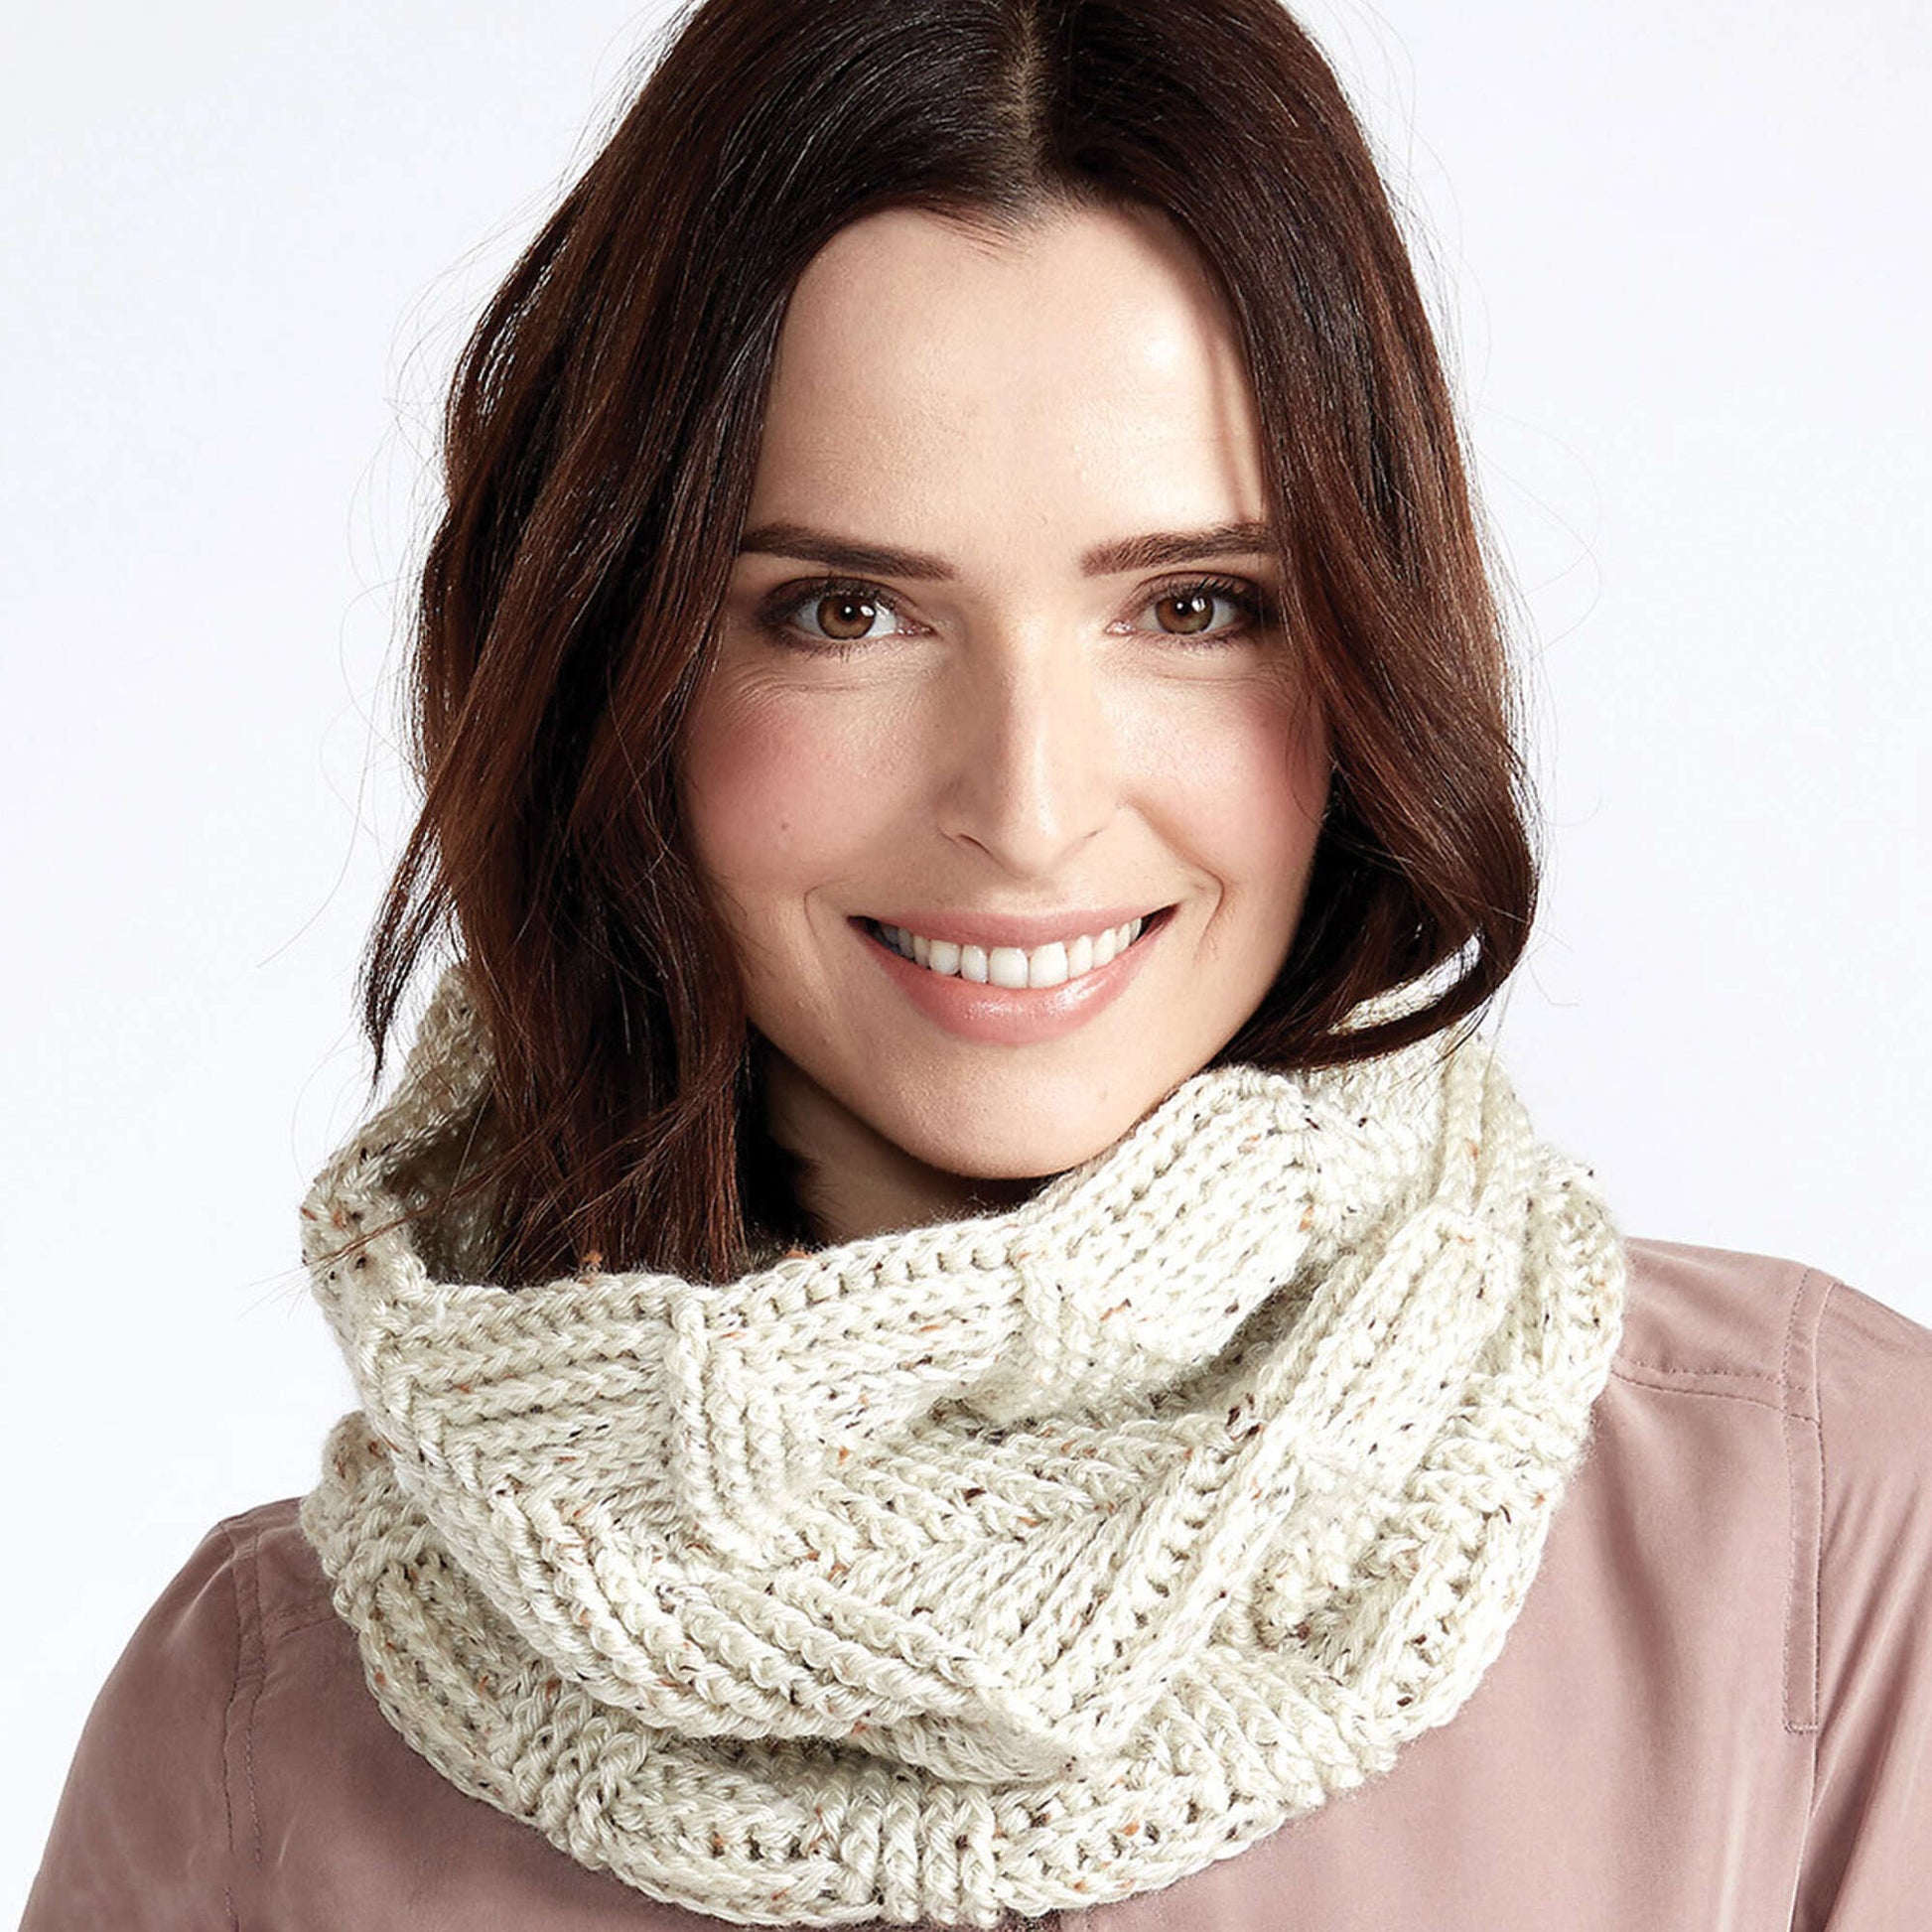 Cowl with a Twist, Knit - Crochet Stores Inc.